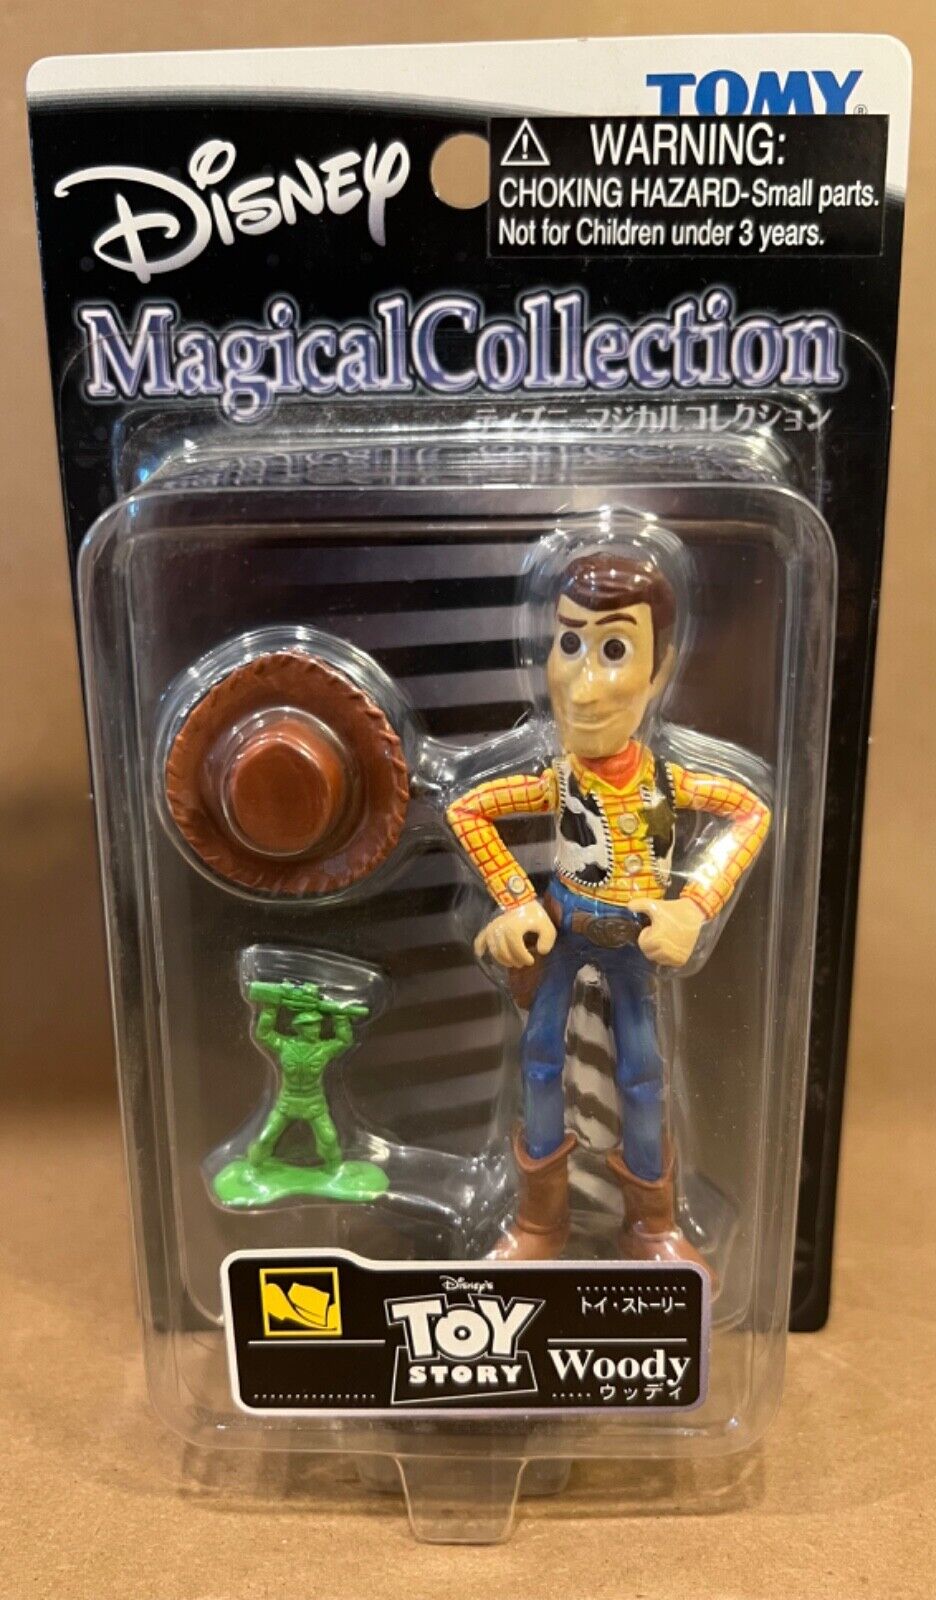 Tomy Disney Magical Collection Woody - #34